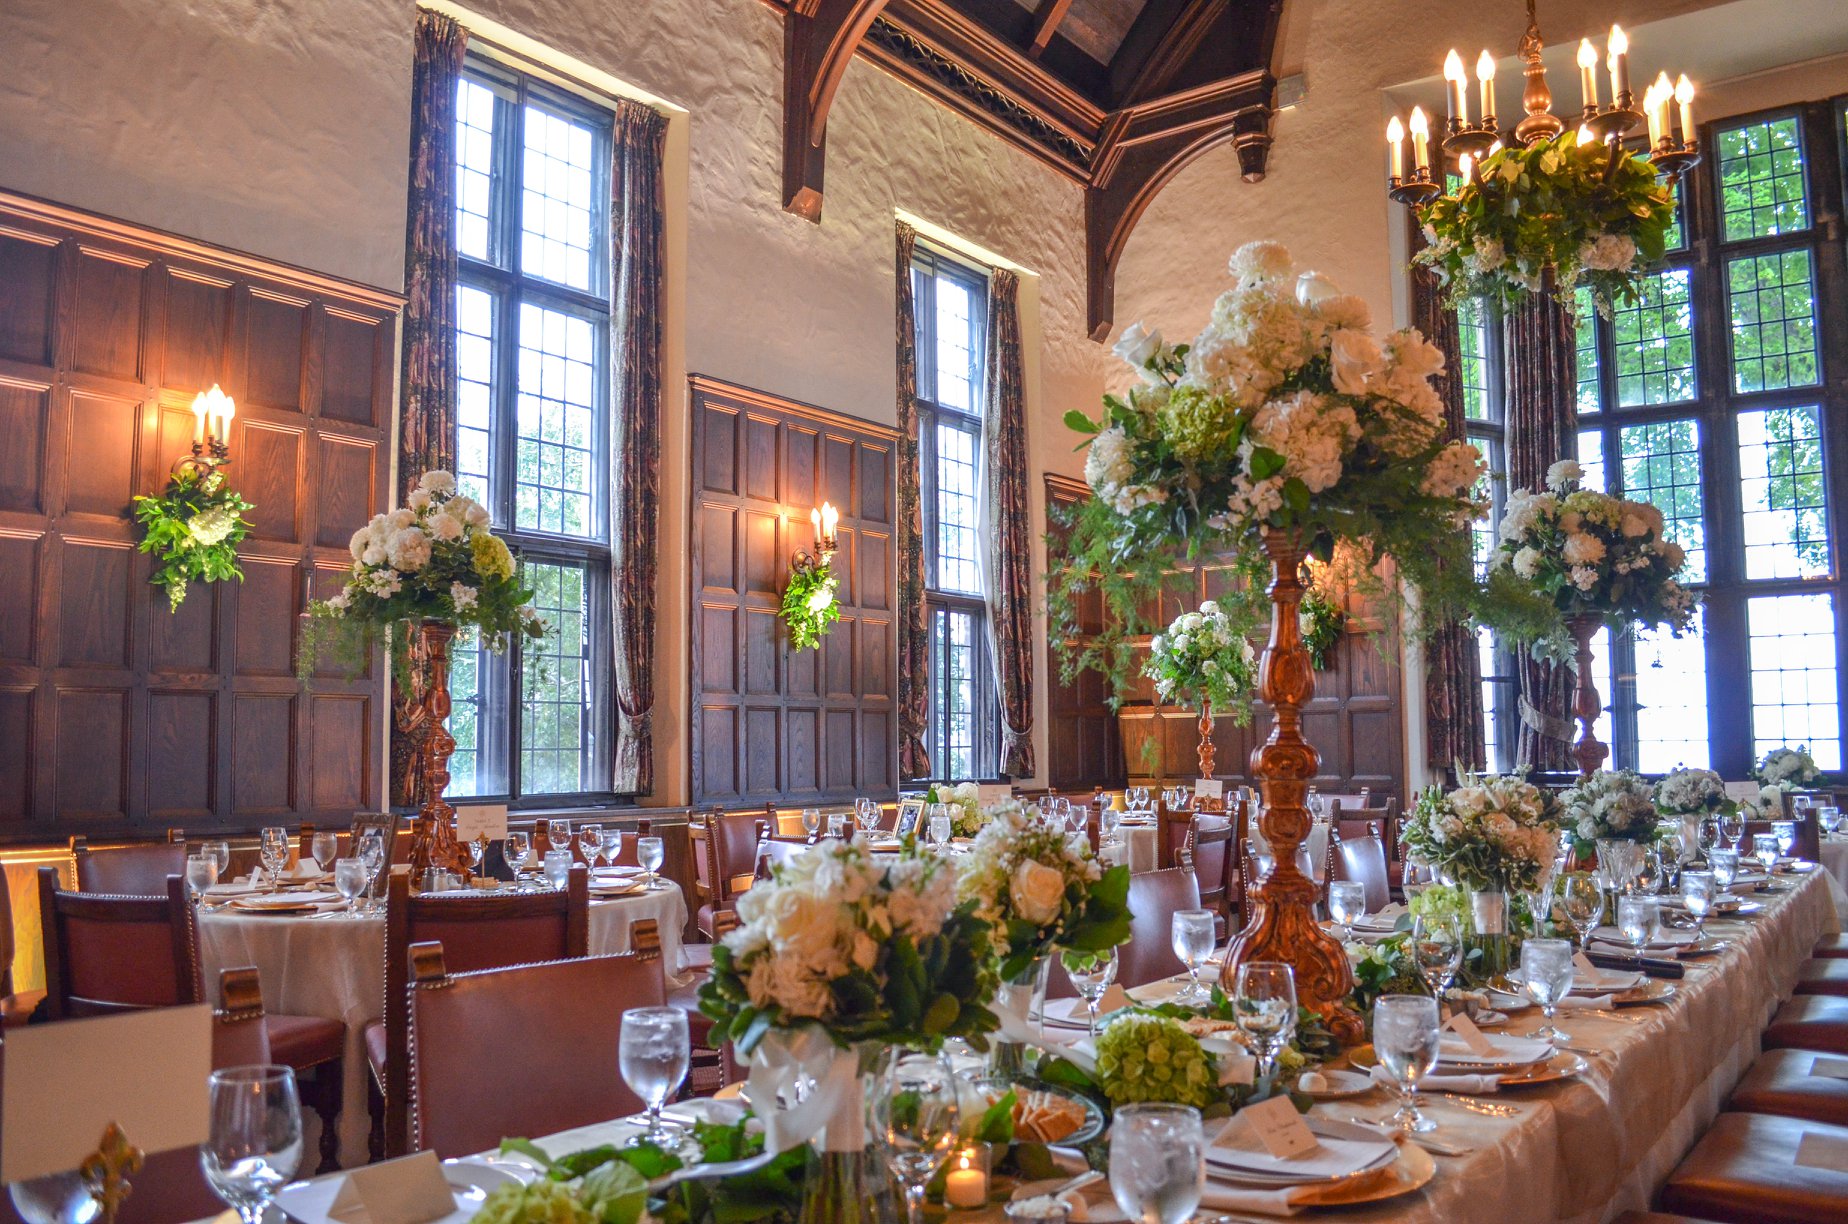 Grand room tables setup for dining adorned with flowers